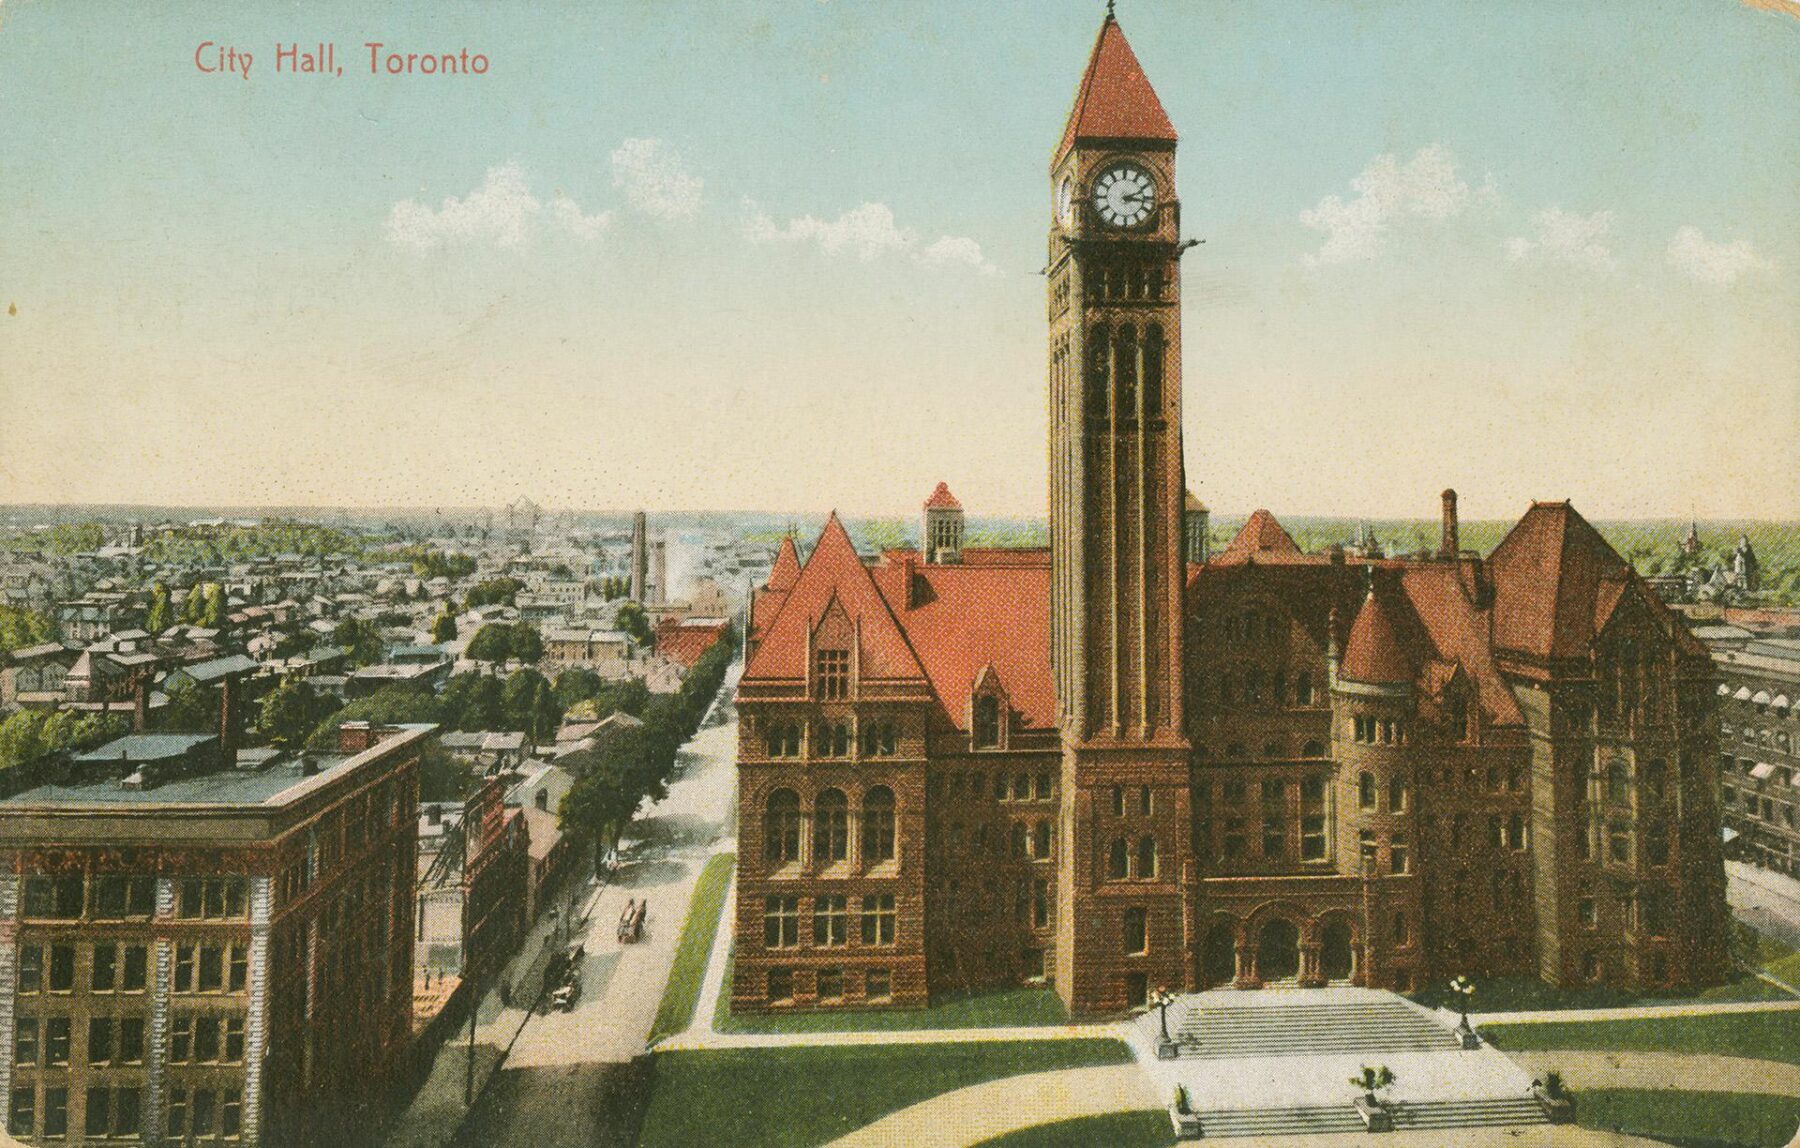 A vintage postcard shows a large government building with a clock tower. To the left of the building is a residential neighbourhood with smaller buildings and houses. In the top left corner of the image, orange text reads "City Hall, Toronto."